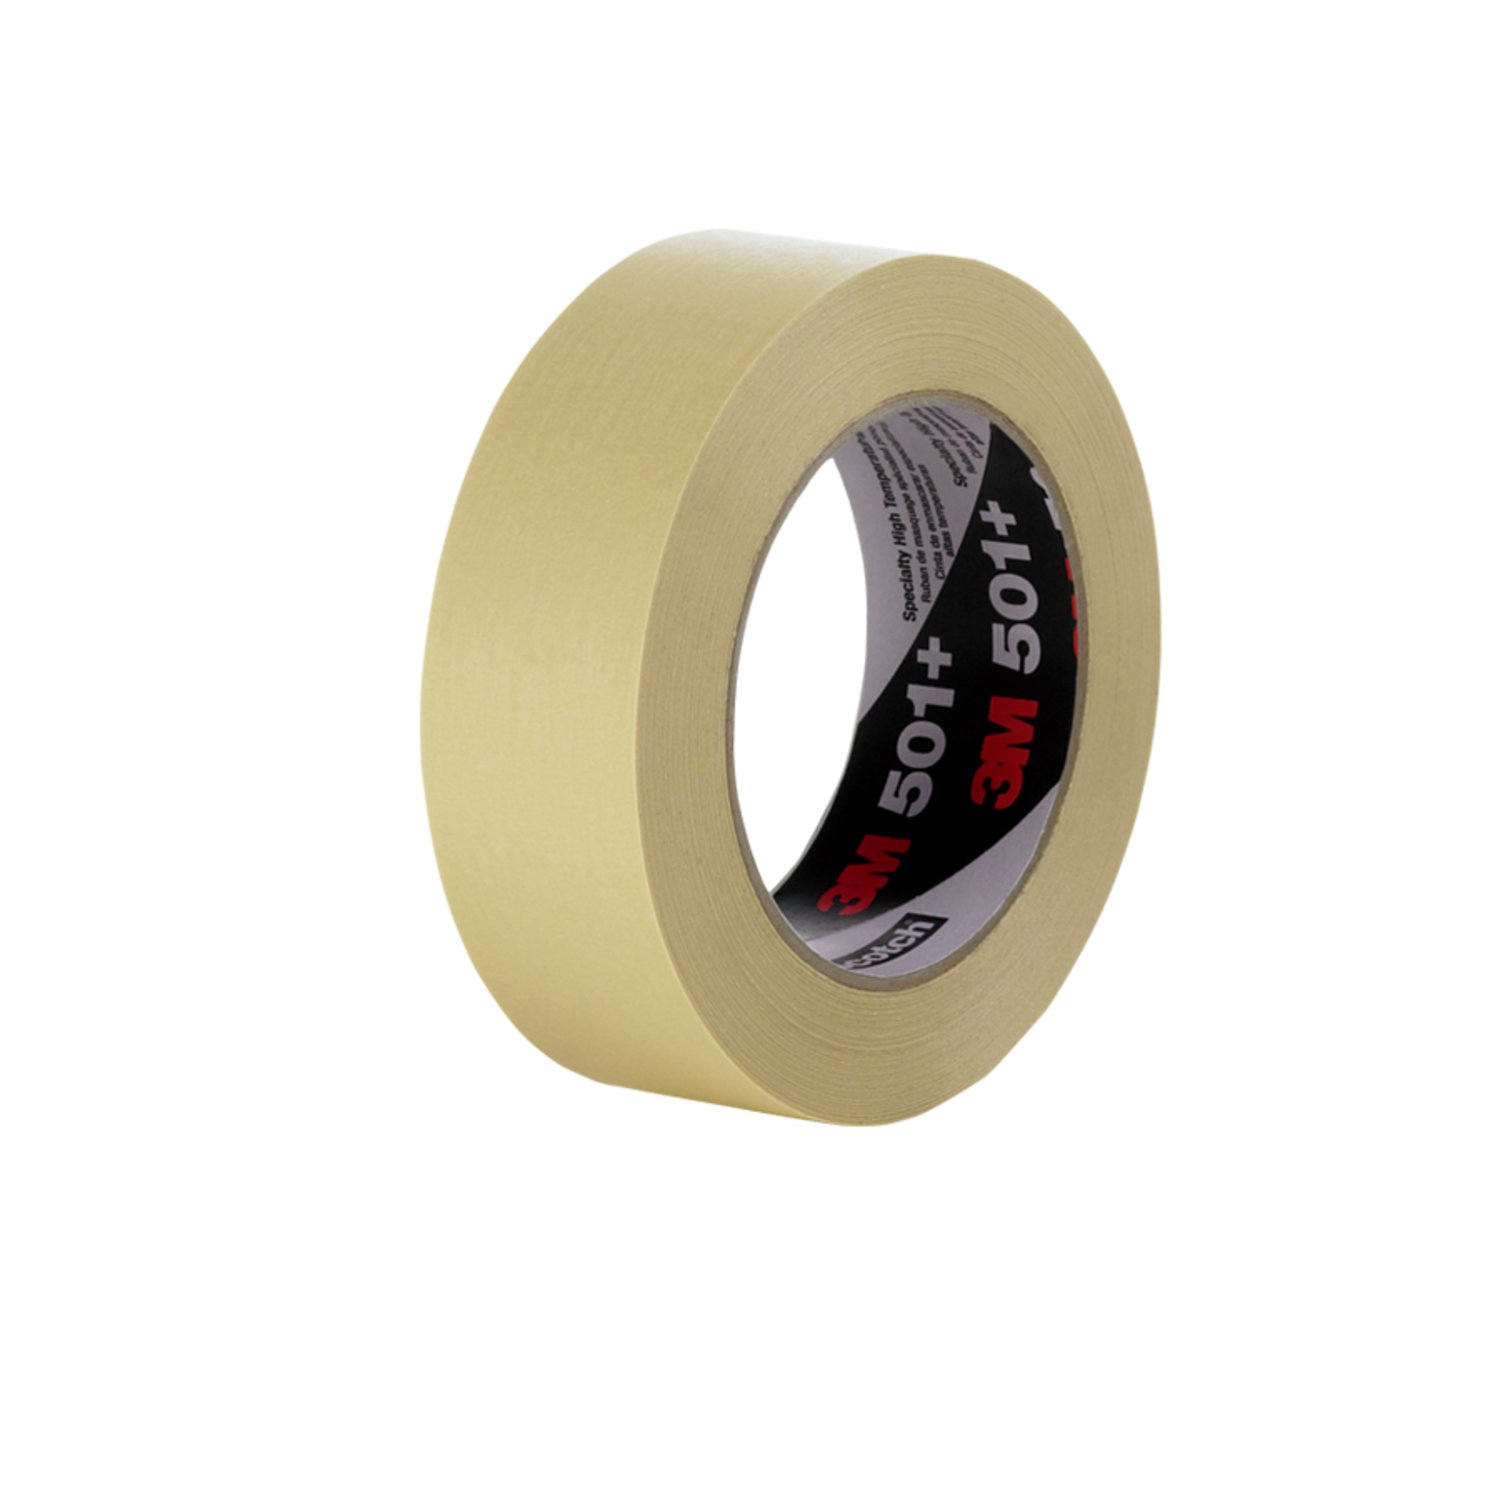 7000089185 - 3M Specialty High Temperature Masking Tape 501+, Tan, 1490 mm x 55 m, 7.3 mil, 7 Rolls/Pallet"